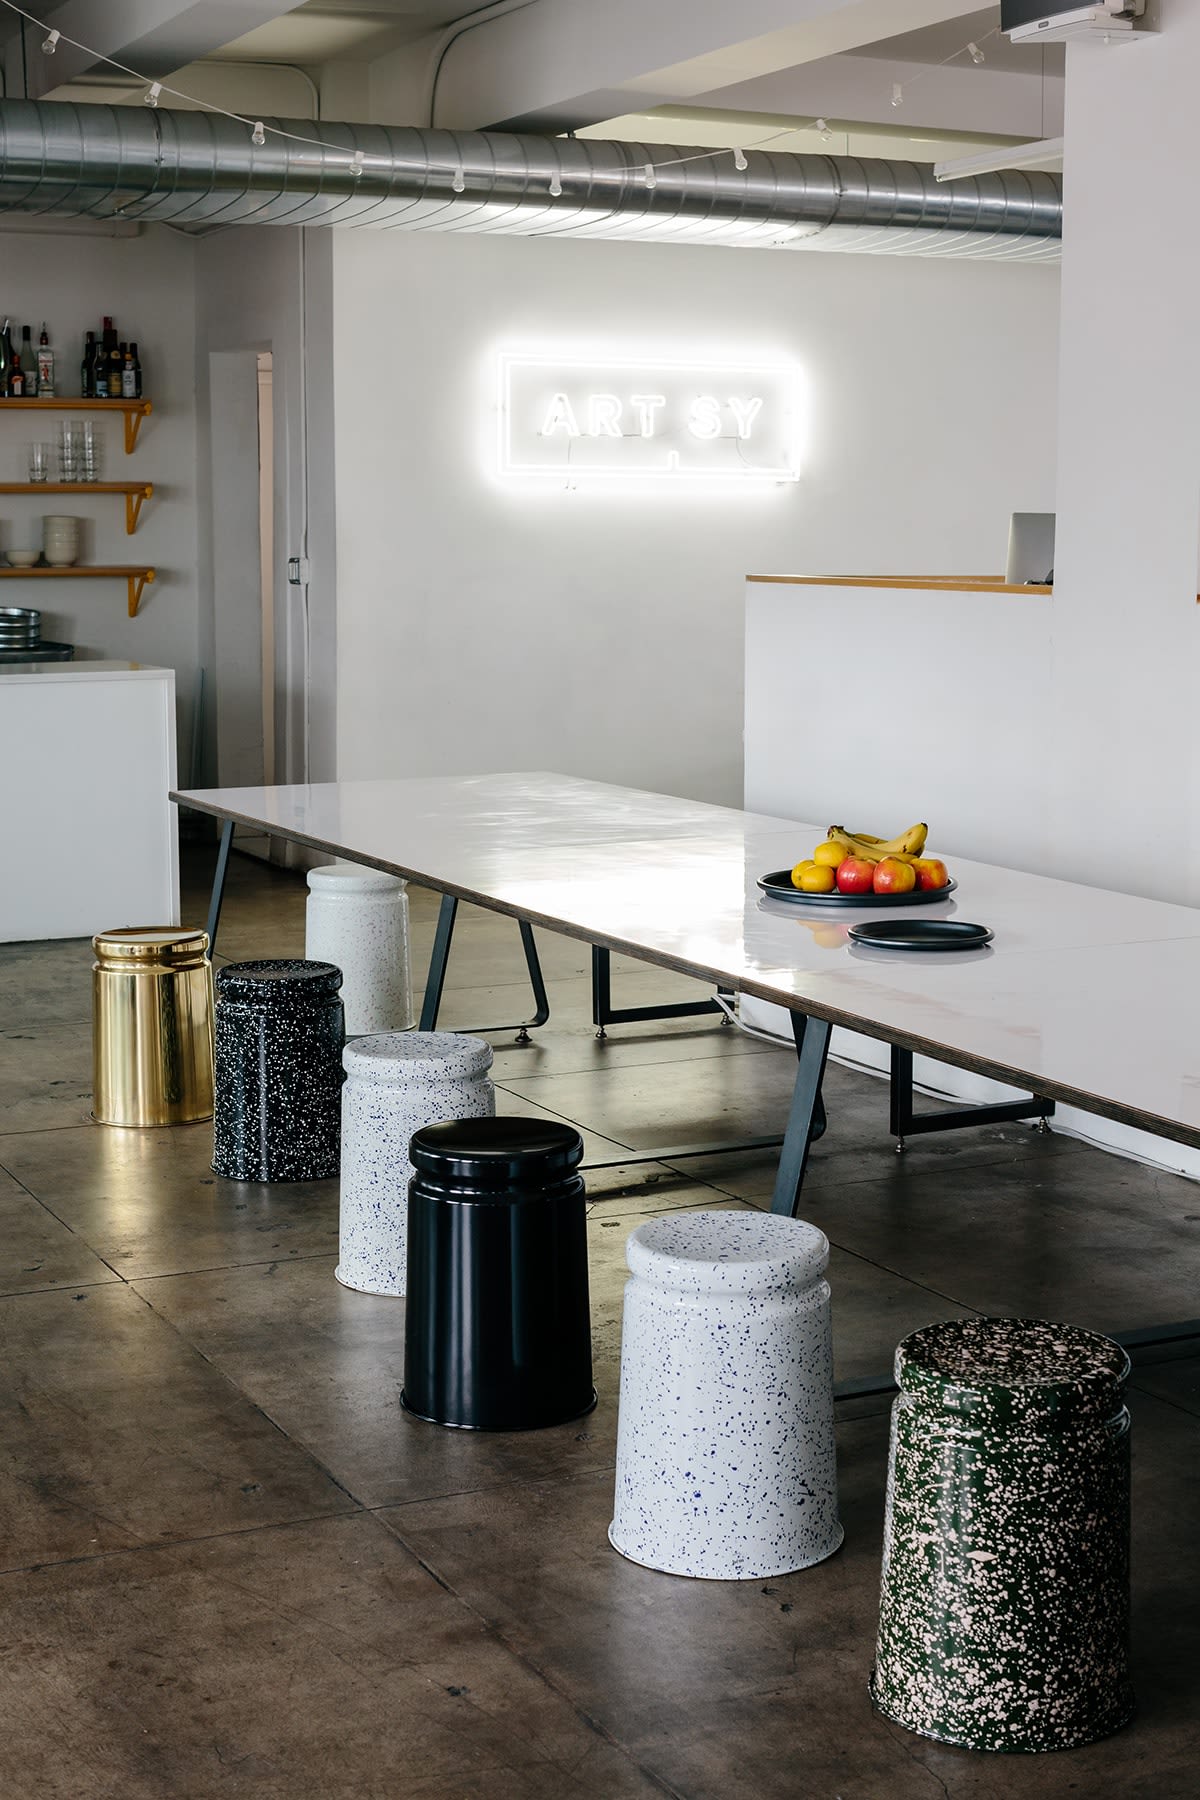 [Last Stools](/furniture/chairs-and-stools/last/14144) at Artsy HQ, New York City, United States.